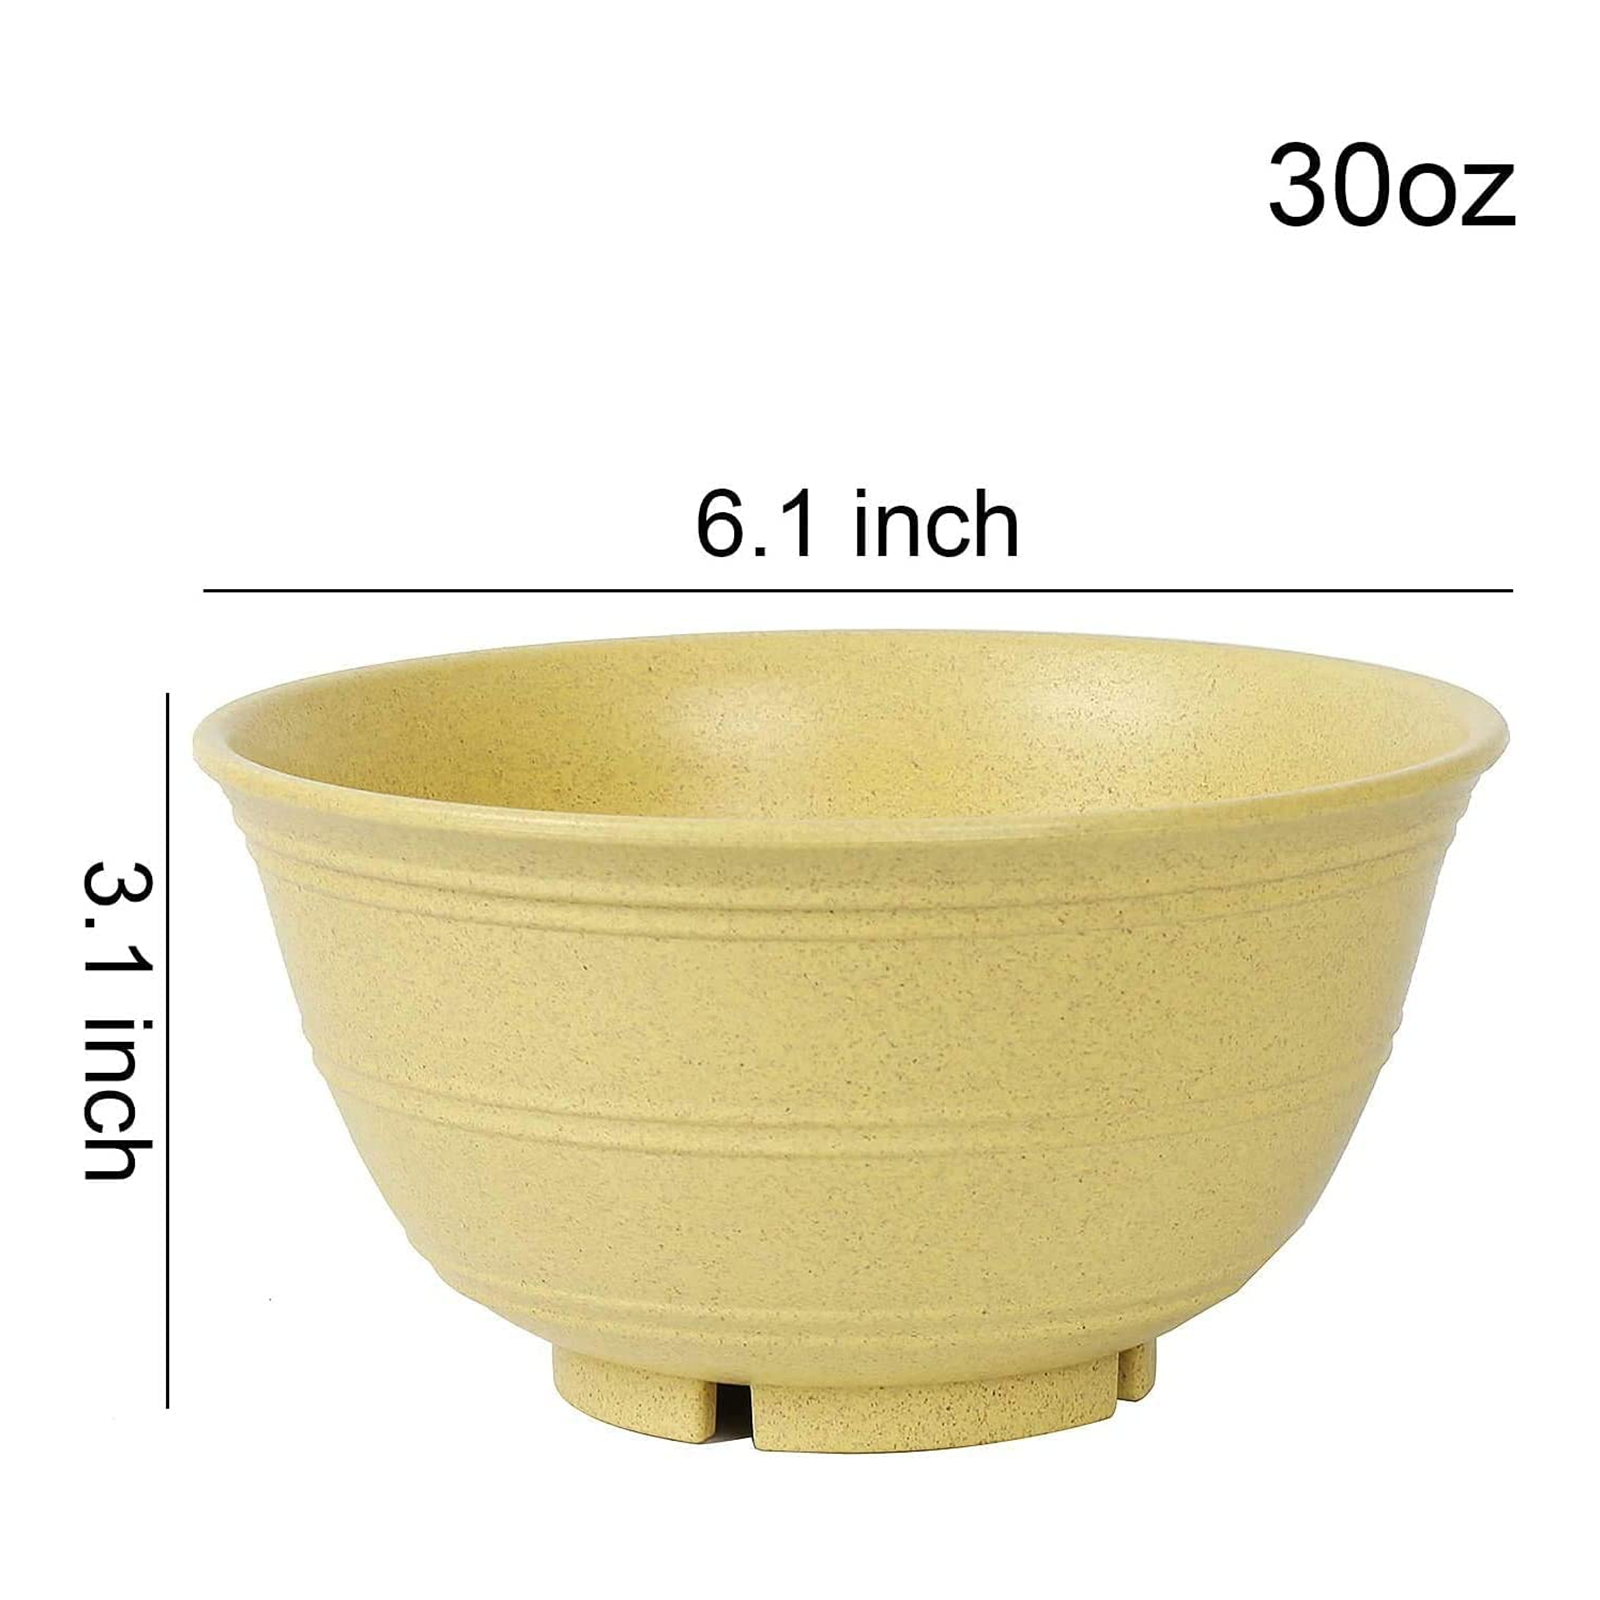 for Soup Shopwithgreen 6 Pcs 30 OZ Unbreakable Cereal Bowl Sets Noodle Premium Wheat Straw Material Fruit Microwave and Dishwasher Safe 